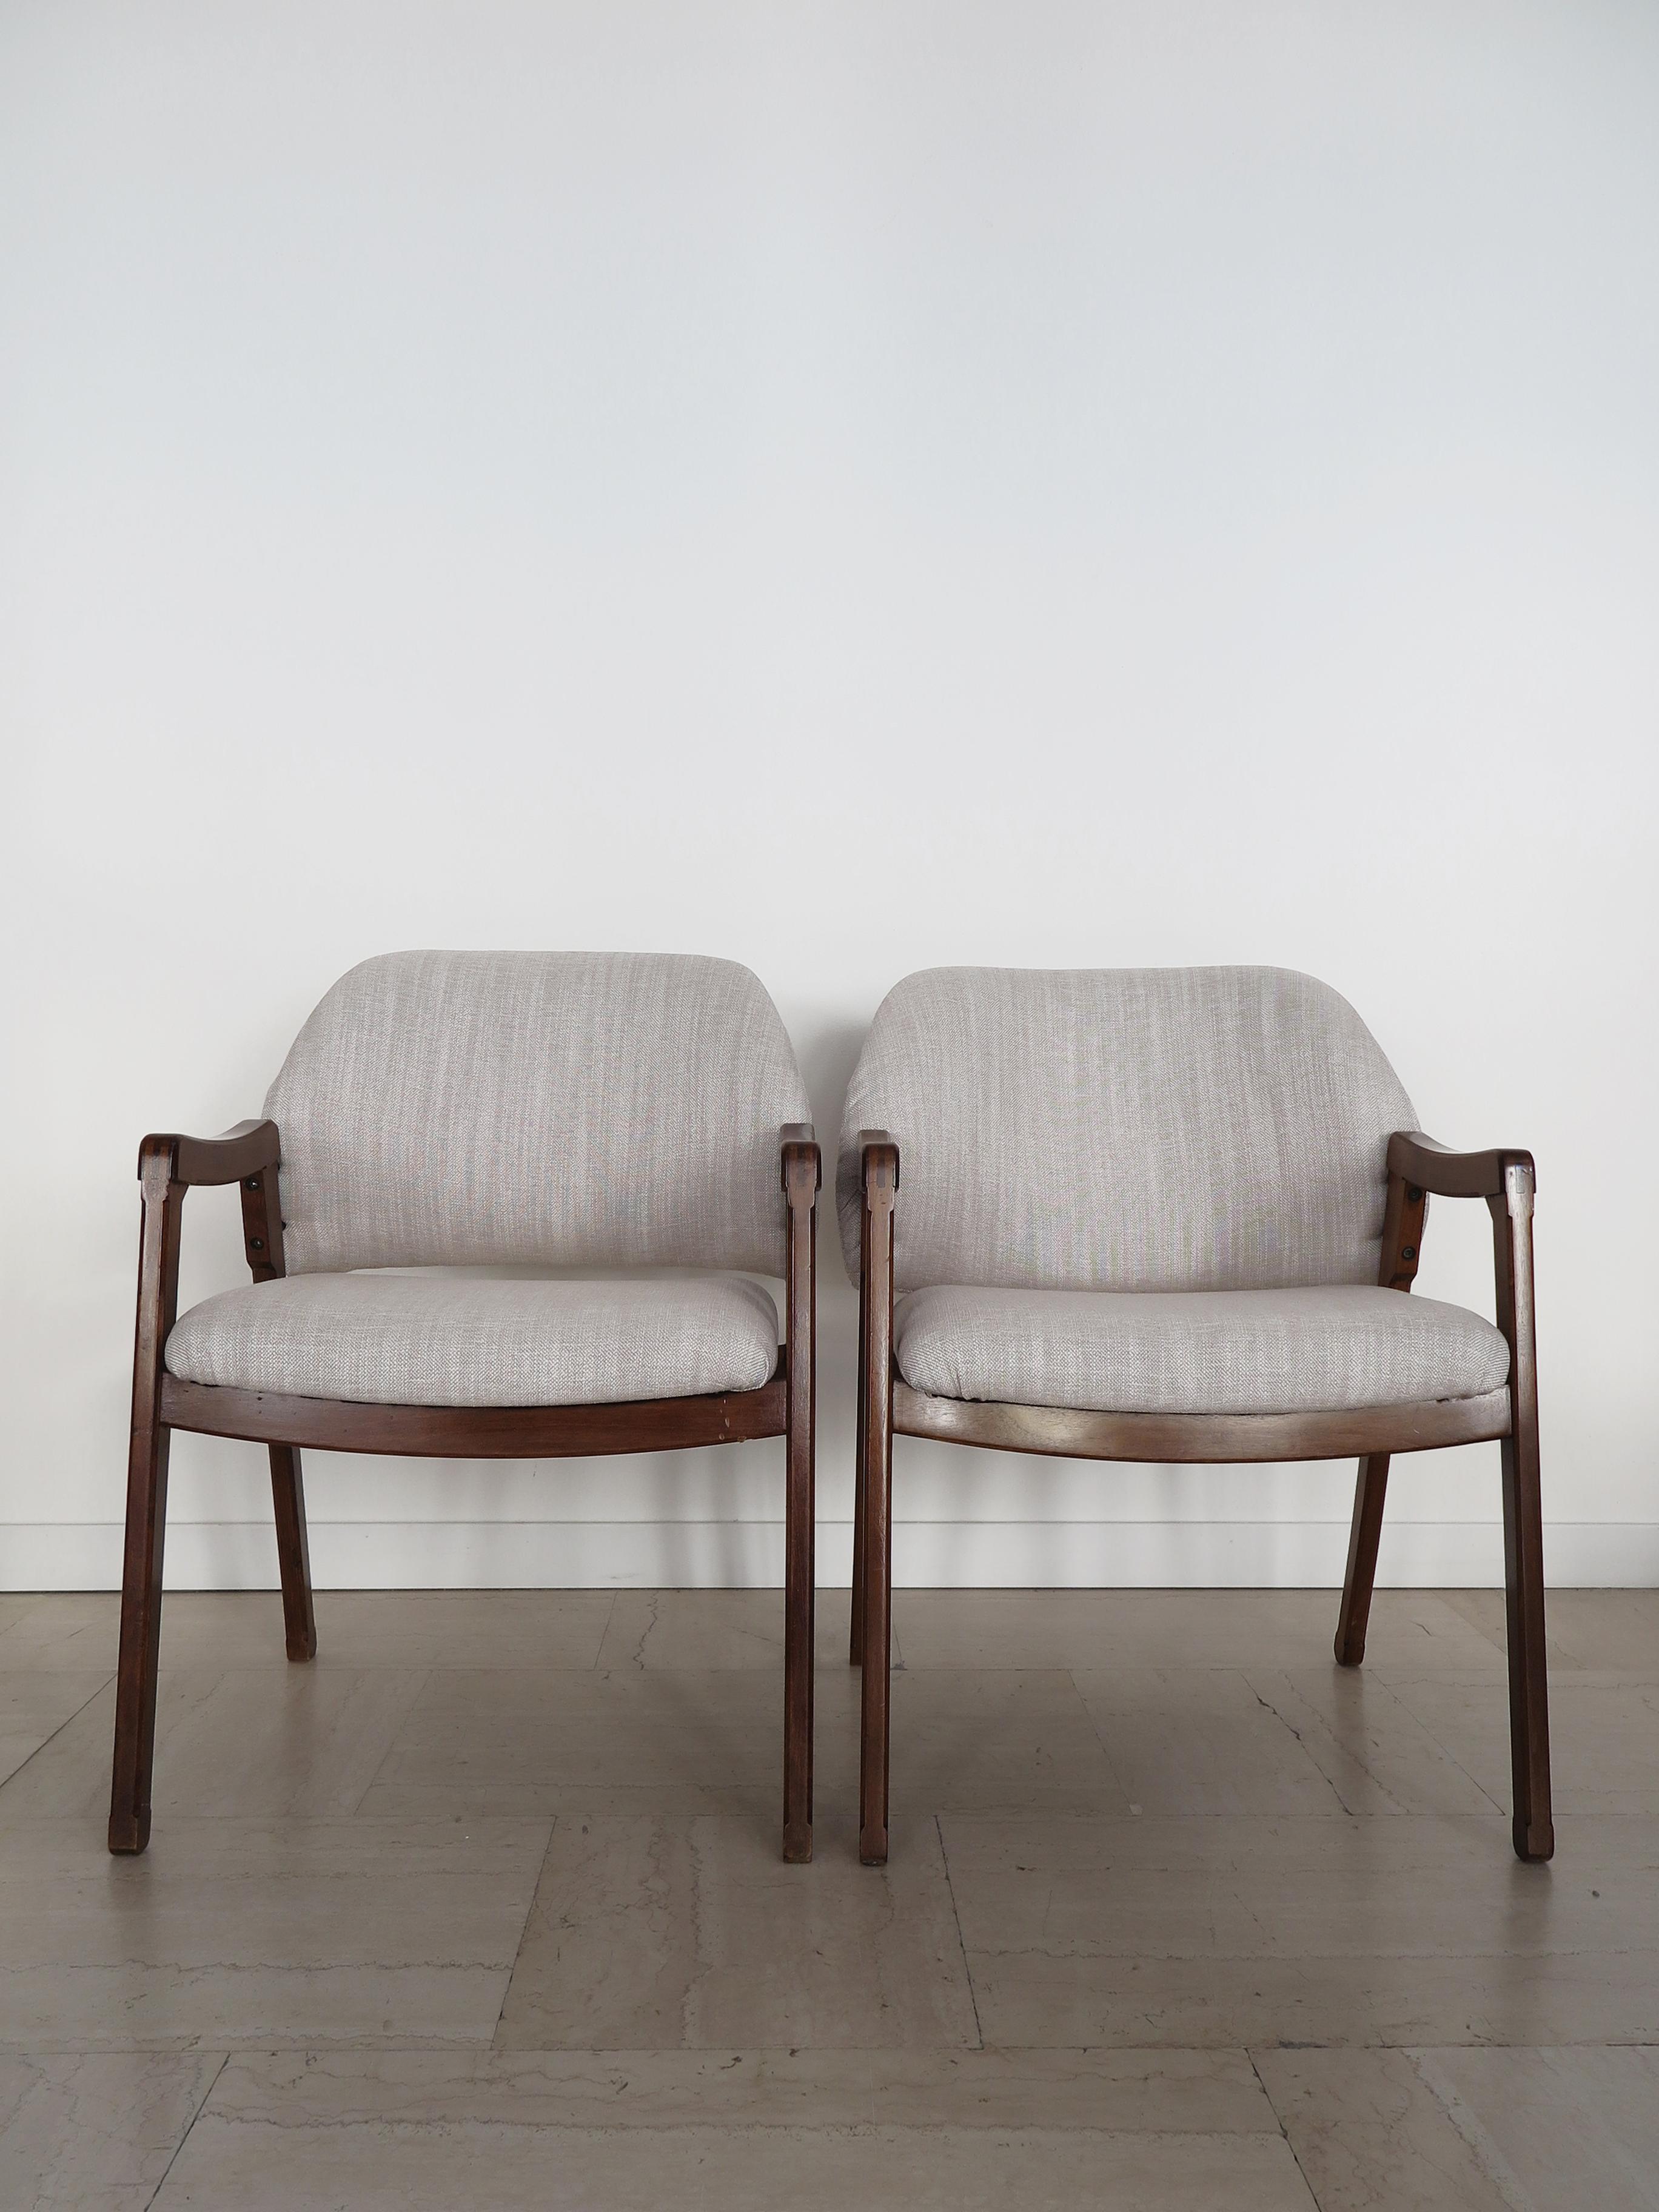 Italian Mid-Century Modern design set of two armchairs model 814 designed by Ico Parisi for Cassina in 1961, solid wood structure and new fabric covering, Italy 1960s
Original Cassina label in an armchair.

Please note that the items are original of